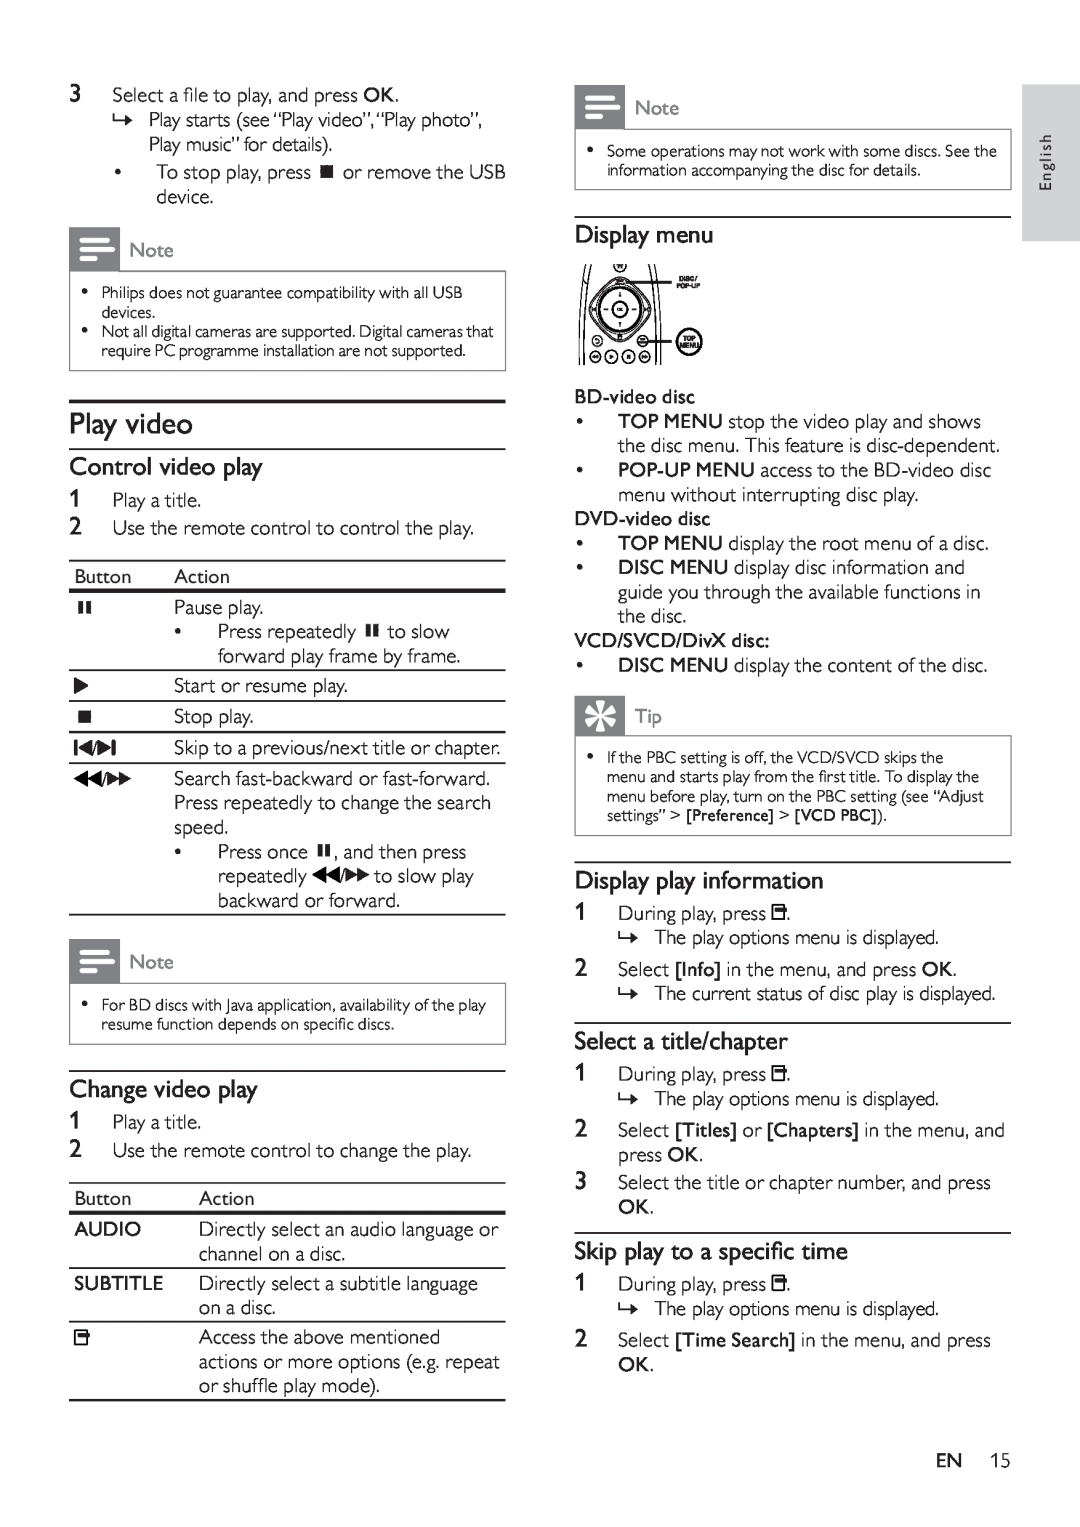 Philips BDP9600 user manual Play video, Control video play, Change video play, Display menu, Display play information 